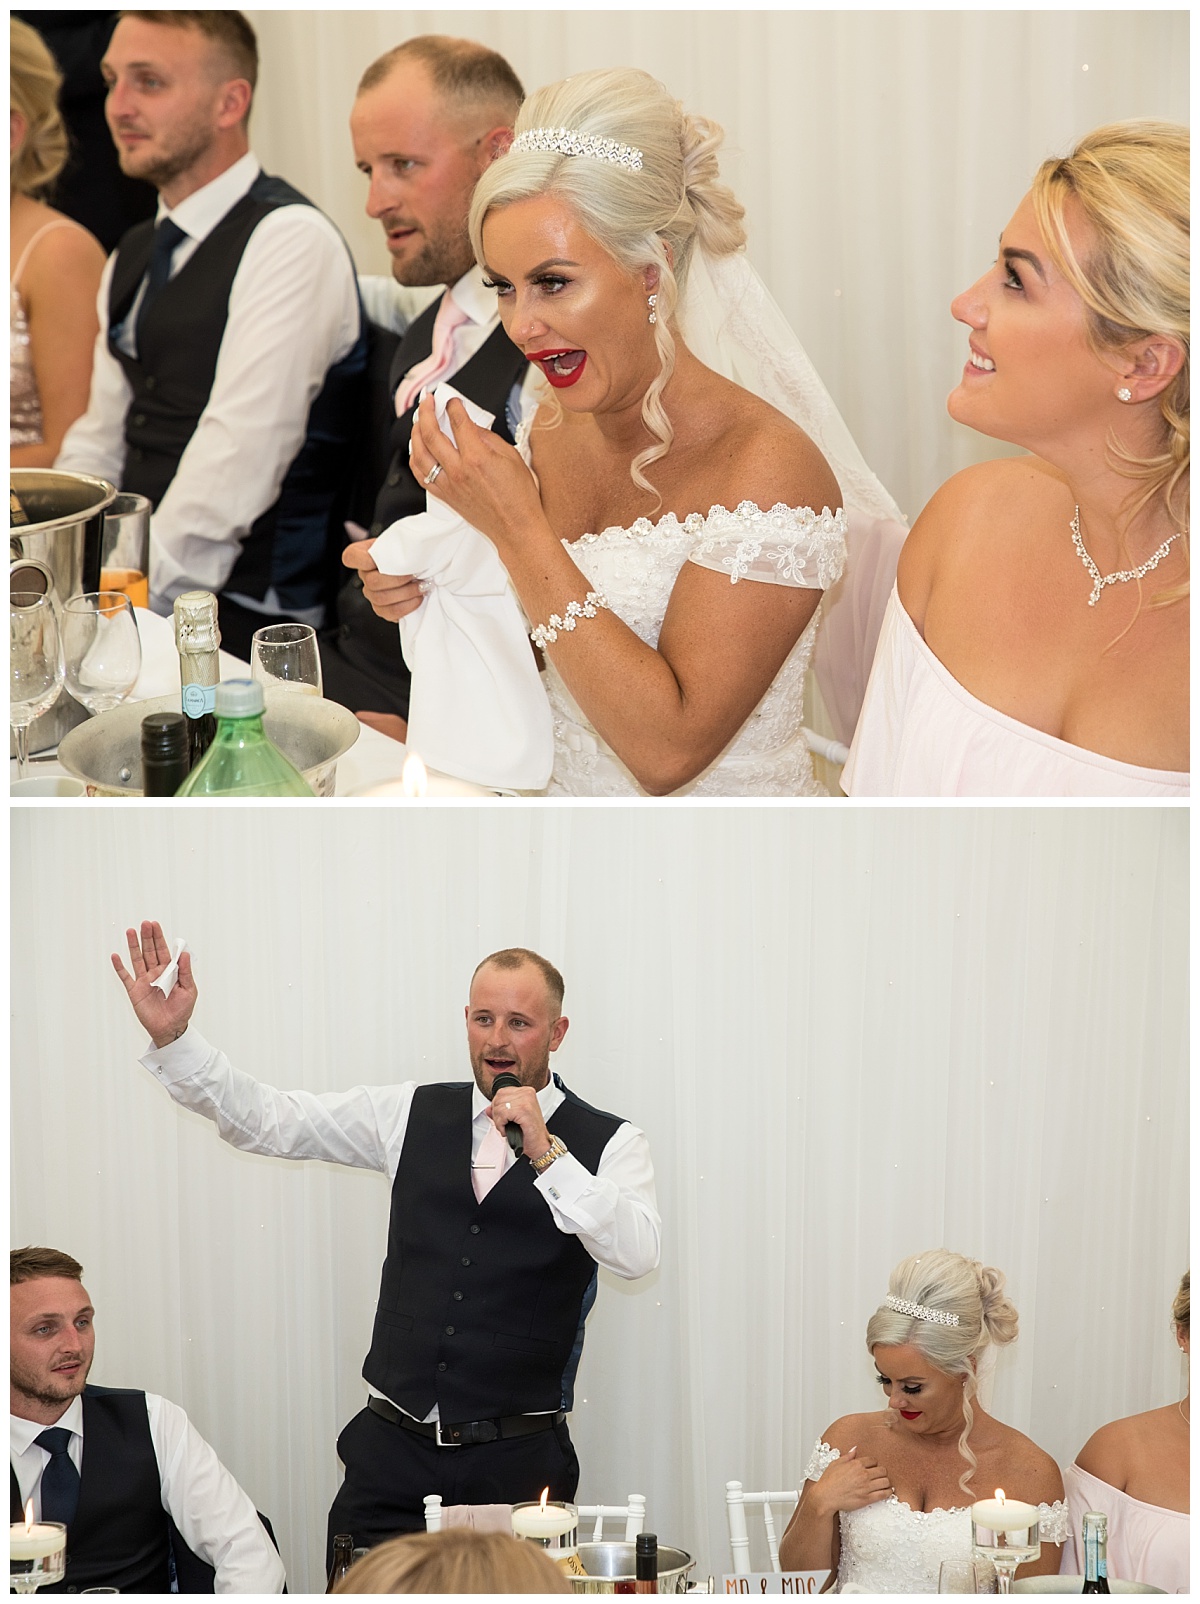 Wedding Photography Manchester - Paula and Daves Mere Court Hotel Wedding 66